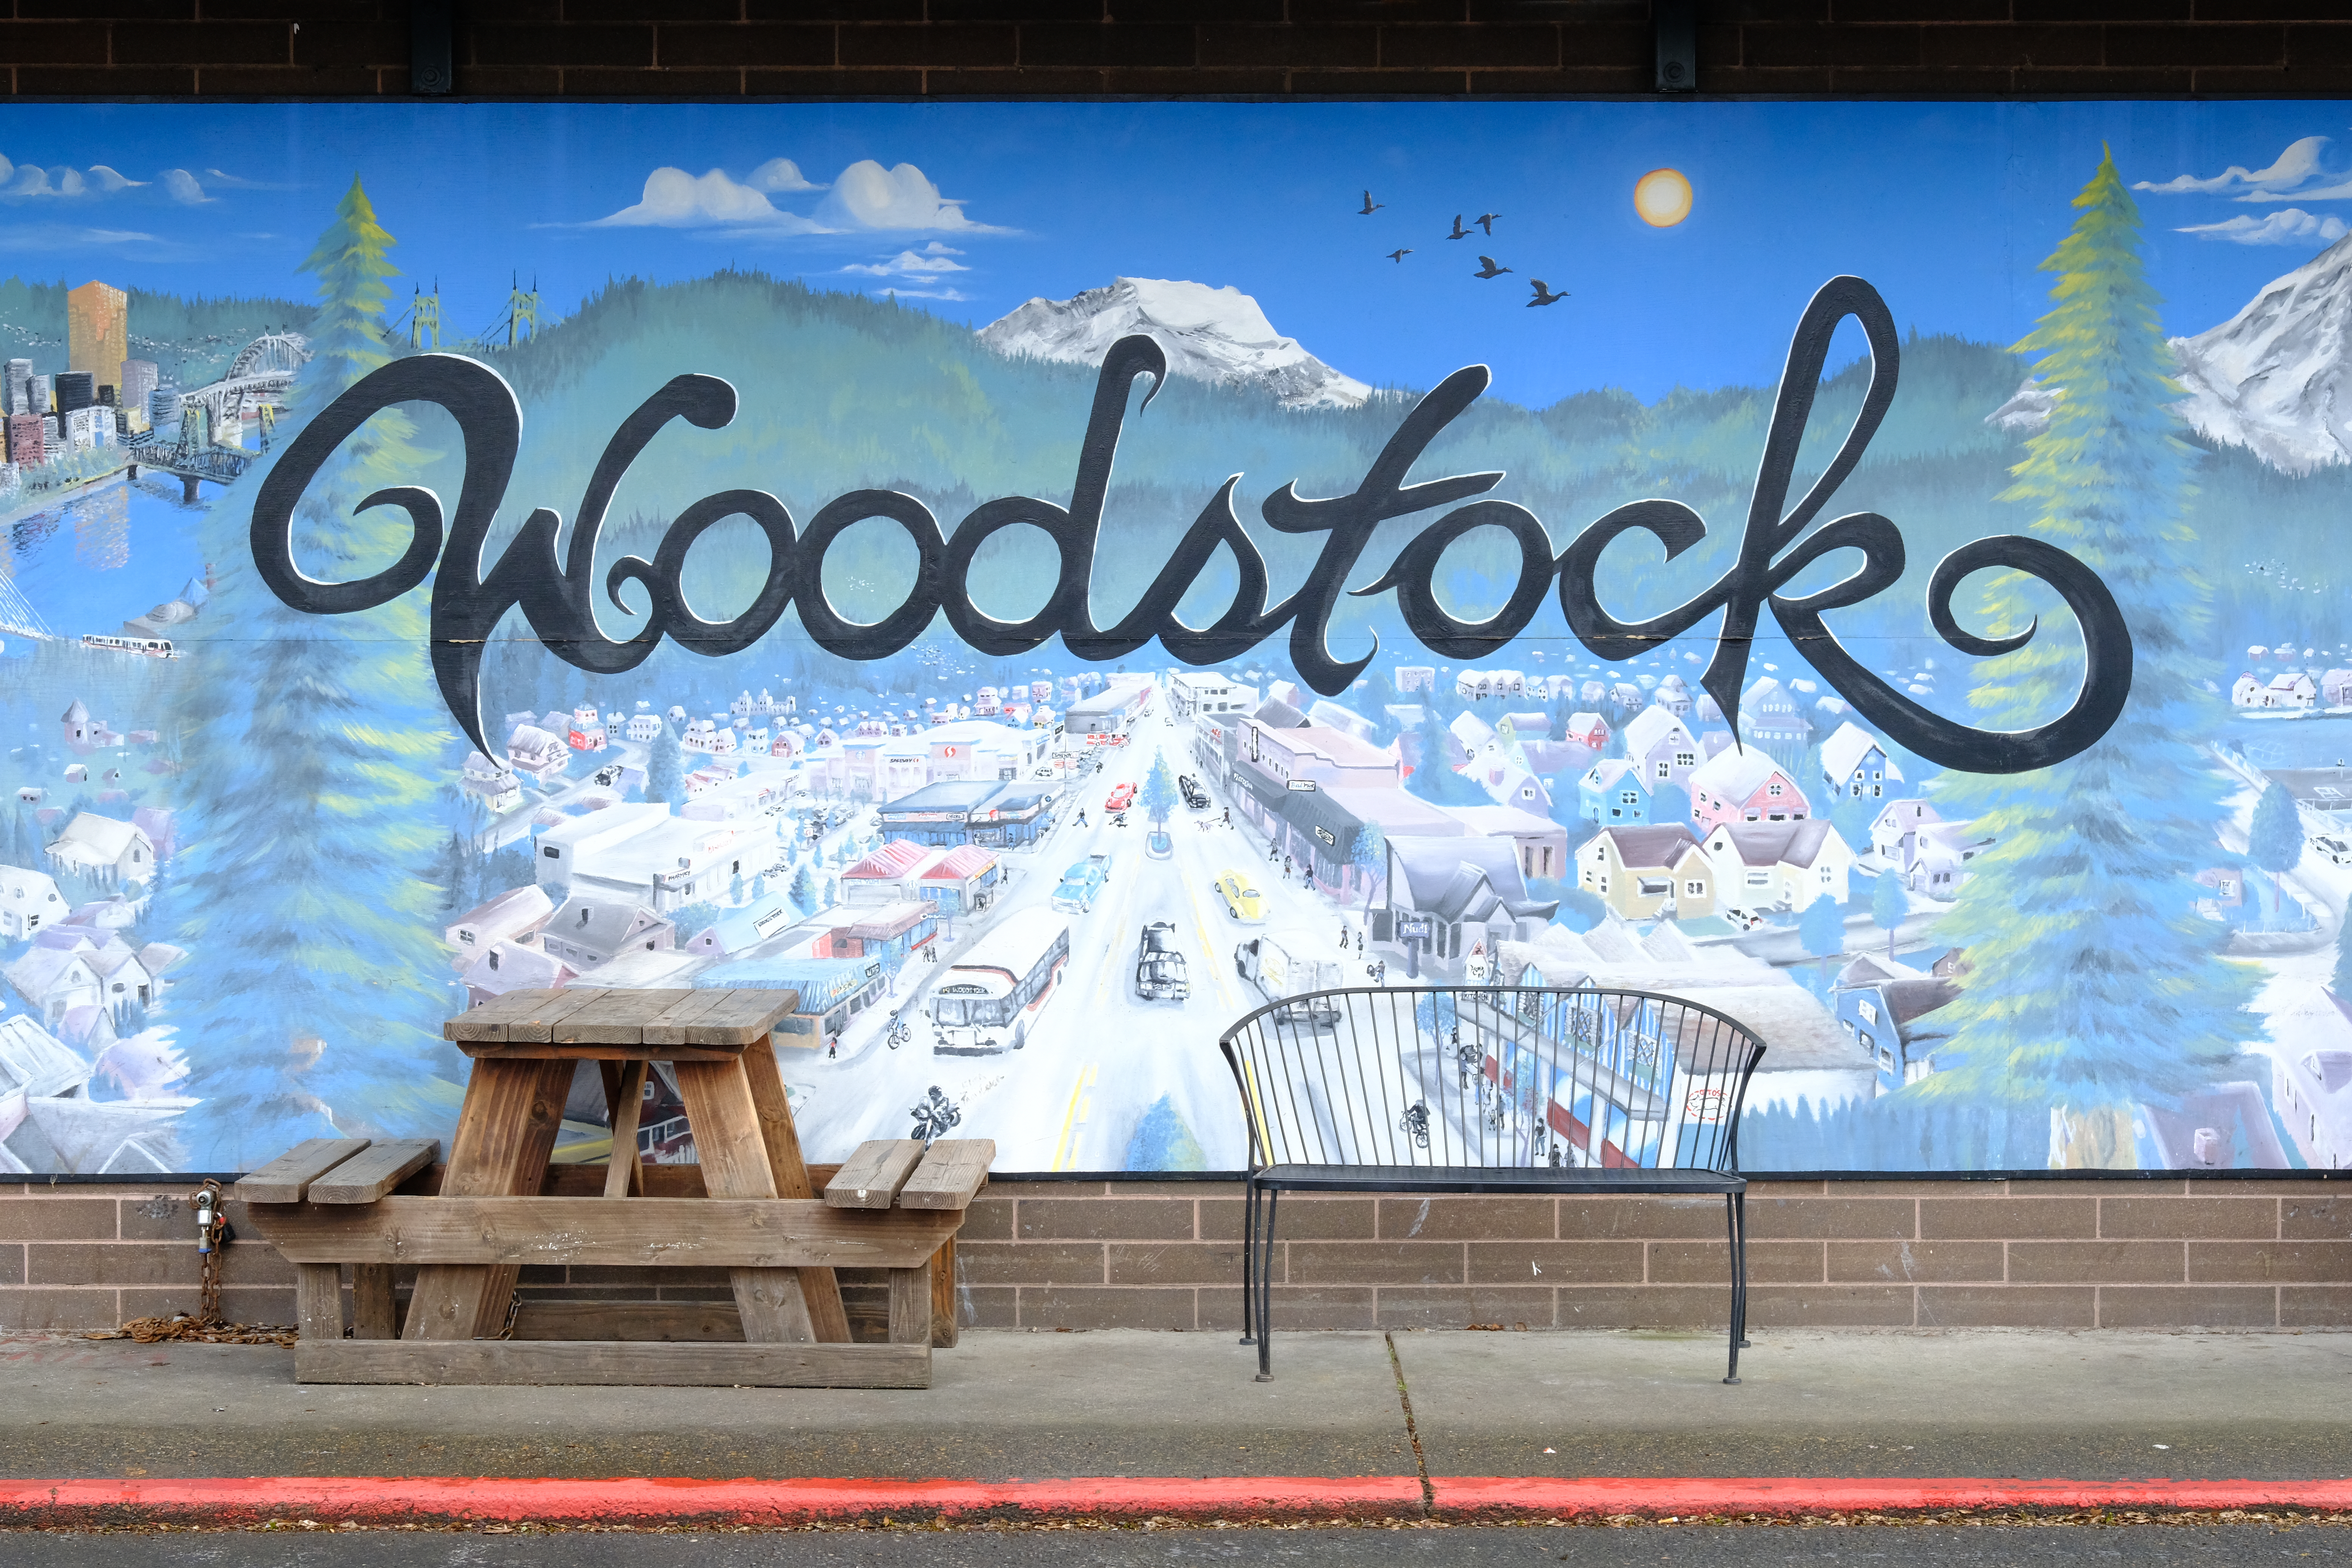 Mural of the Woodstock neighborhood in front of a picnic table and park bench